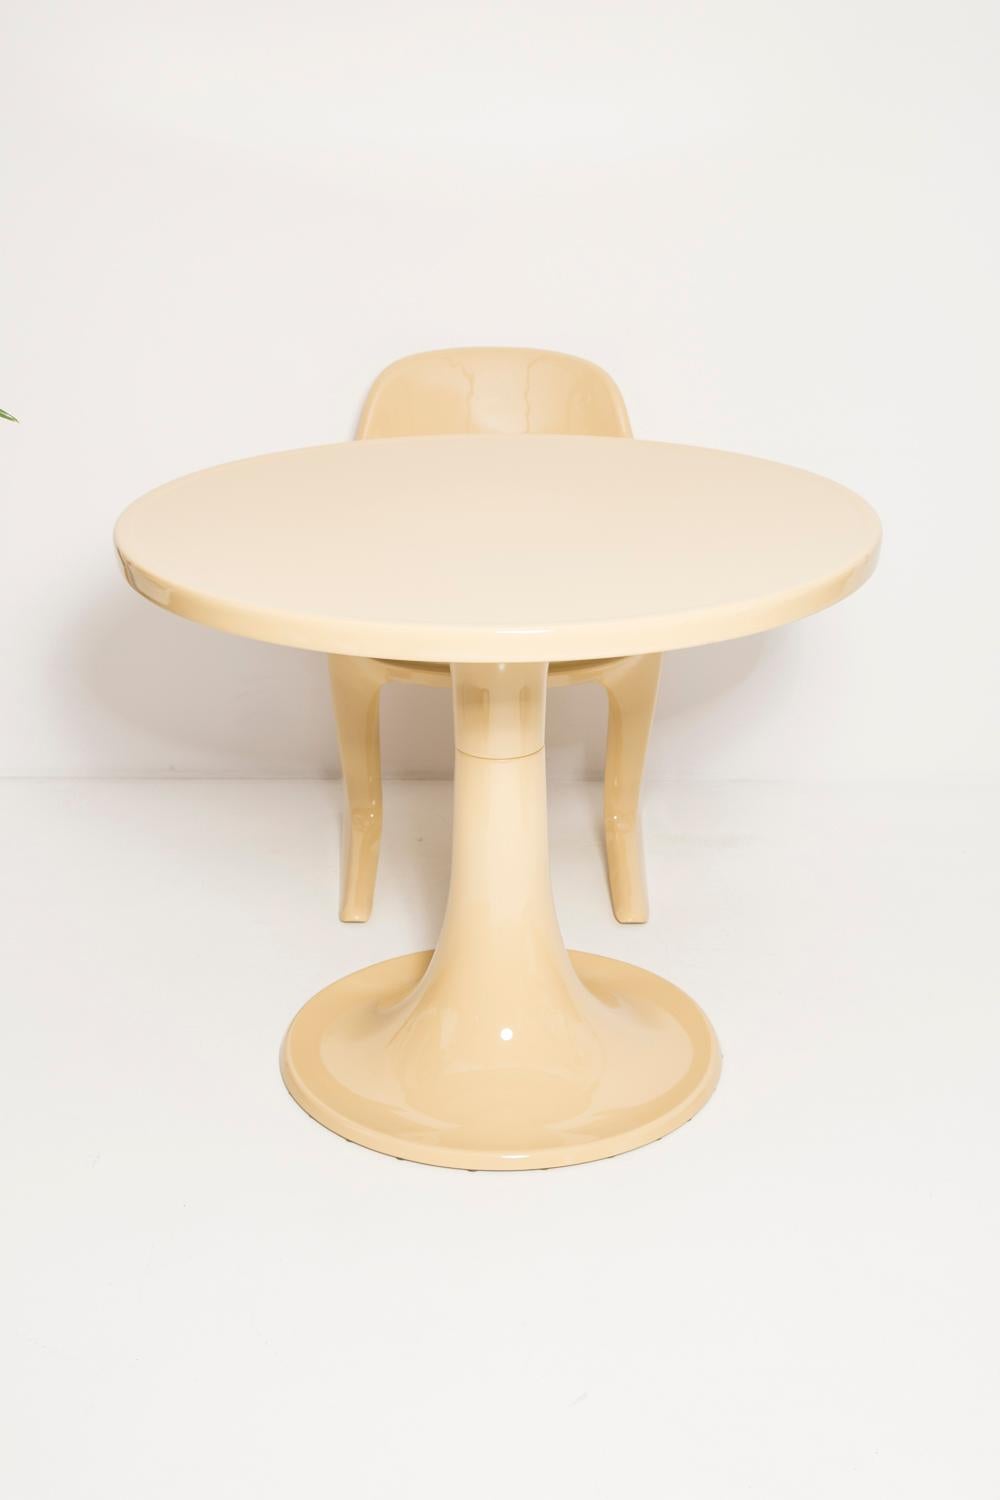 20th Century Midcentury Beige and Blue Kangaroo Chairs and Table Ernst Moeckl, Germany, 1968 For Sale